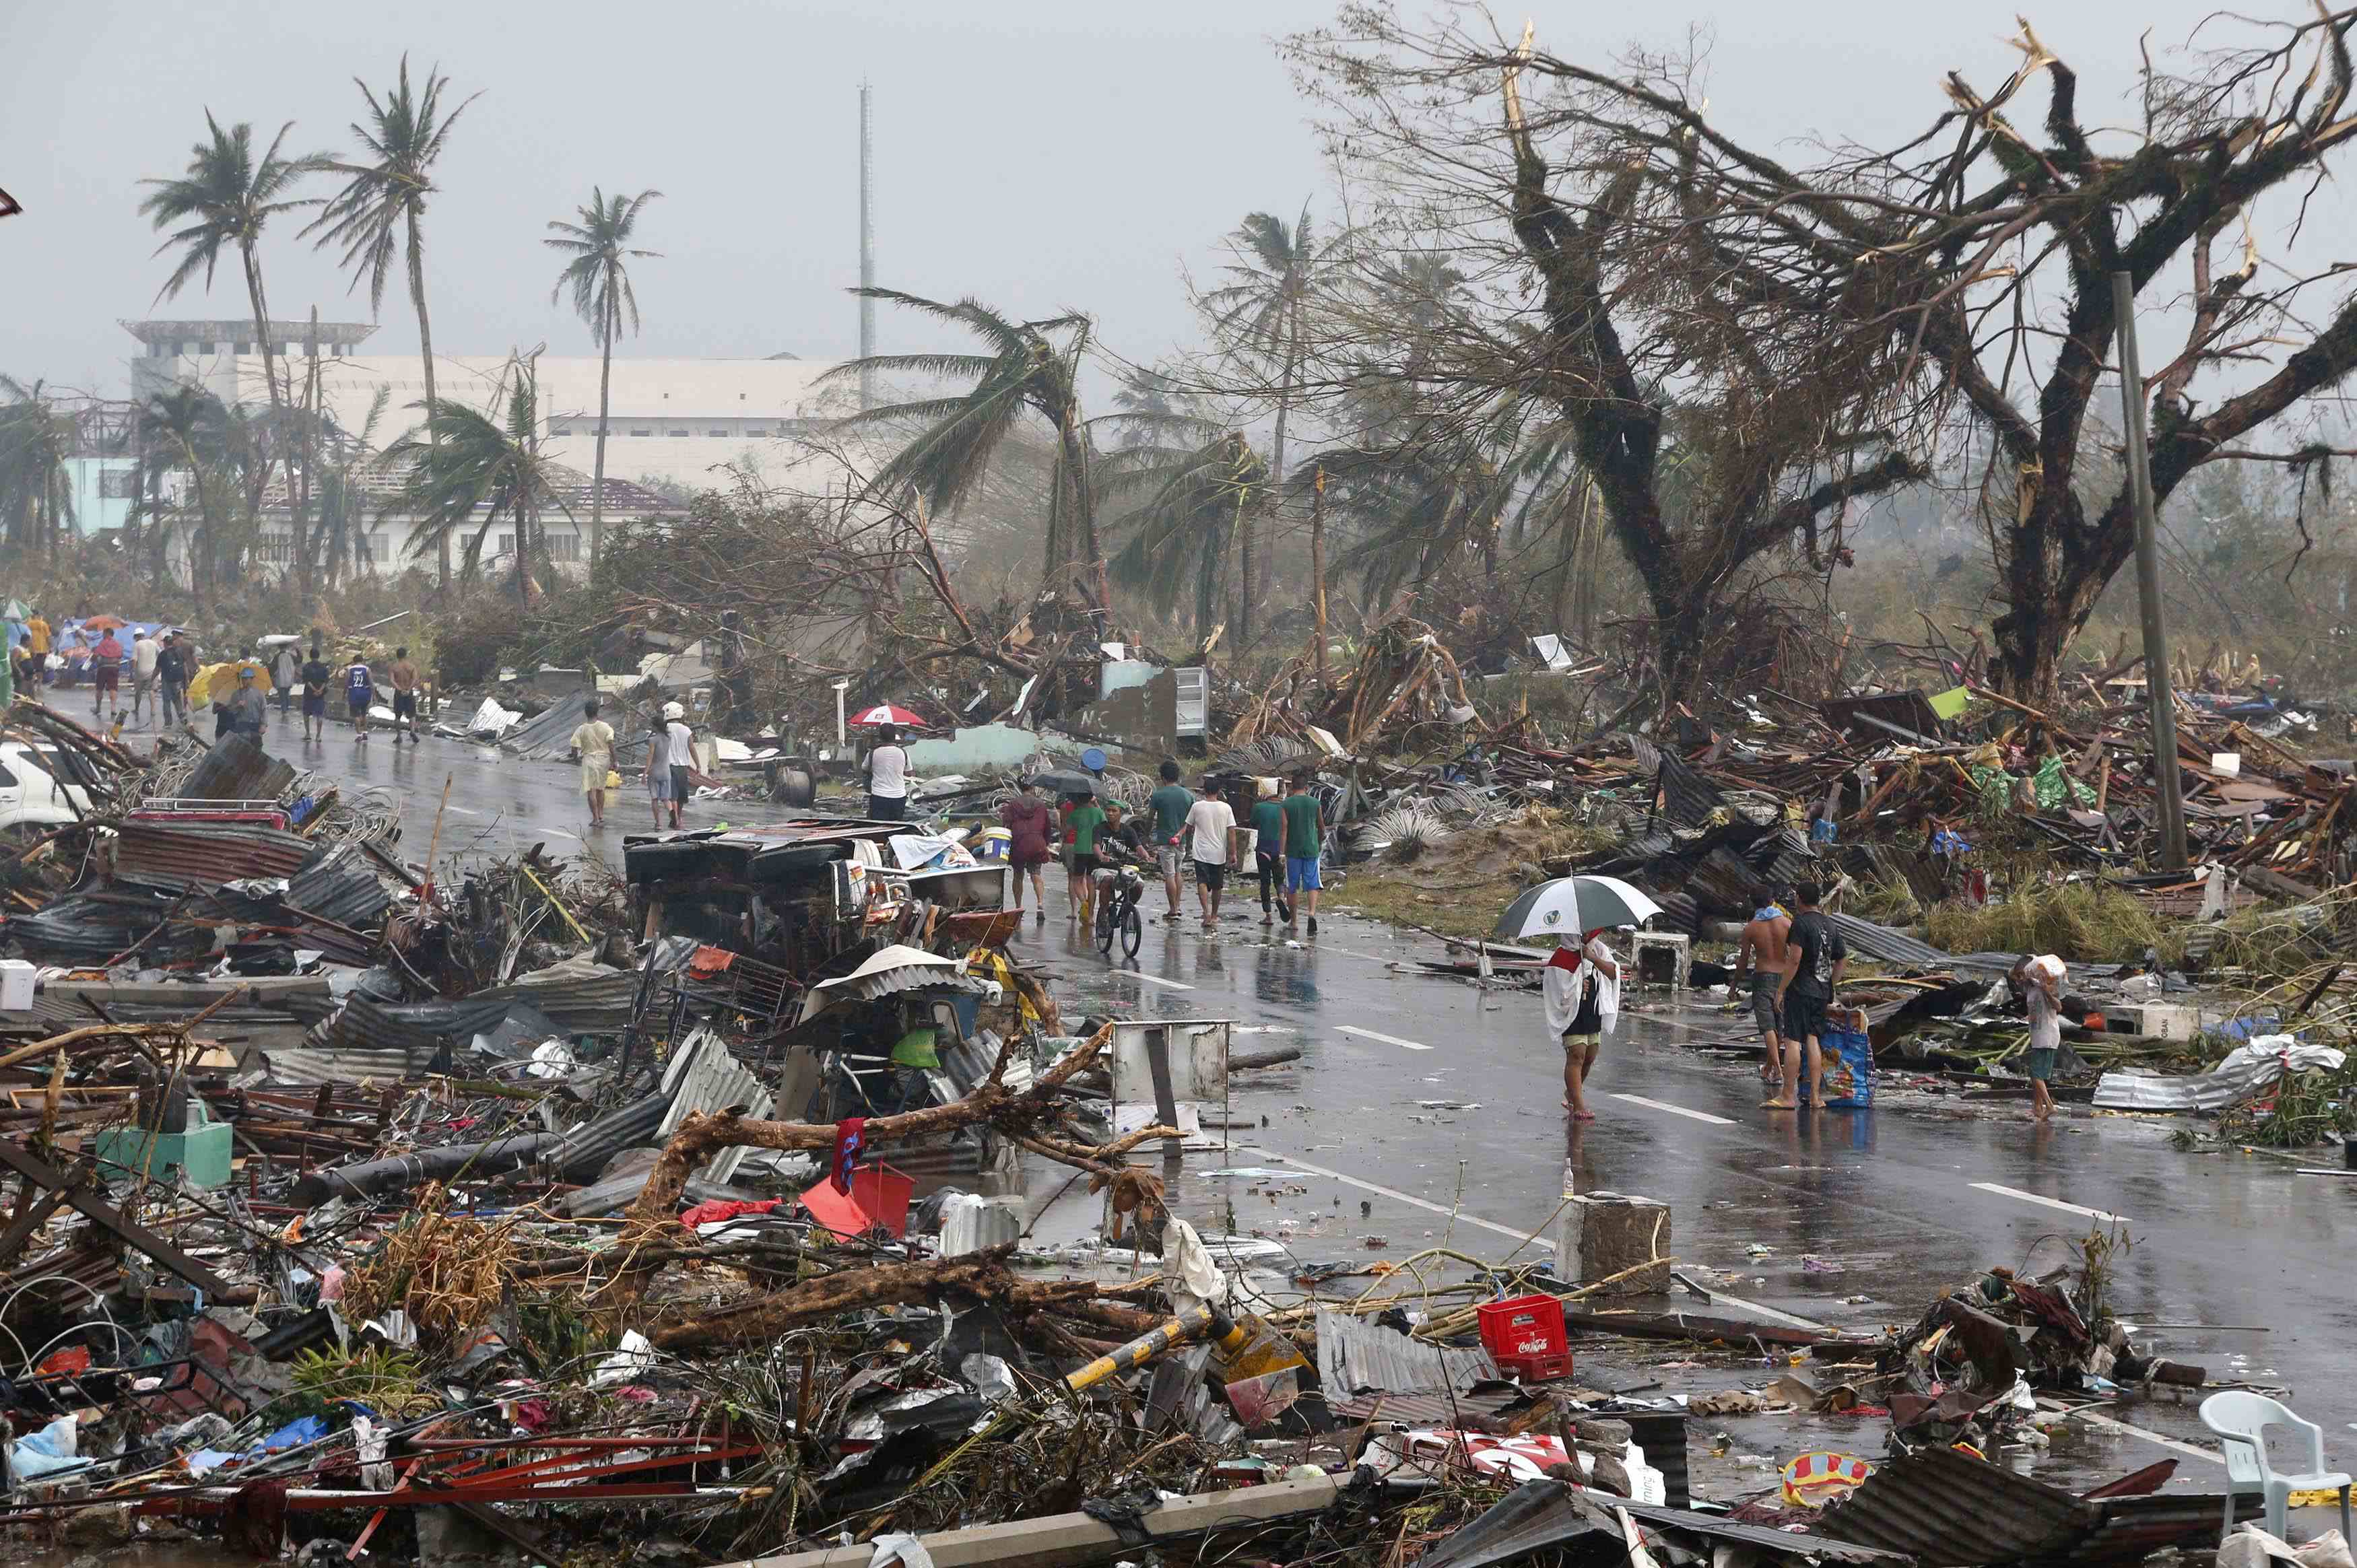 Residents walk on a road littered with debris after Super Typhoon Haiyan battered Tacloban city in central Philippines